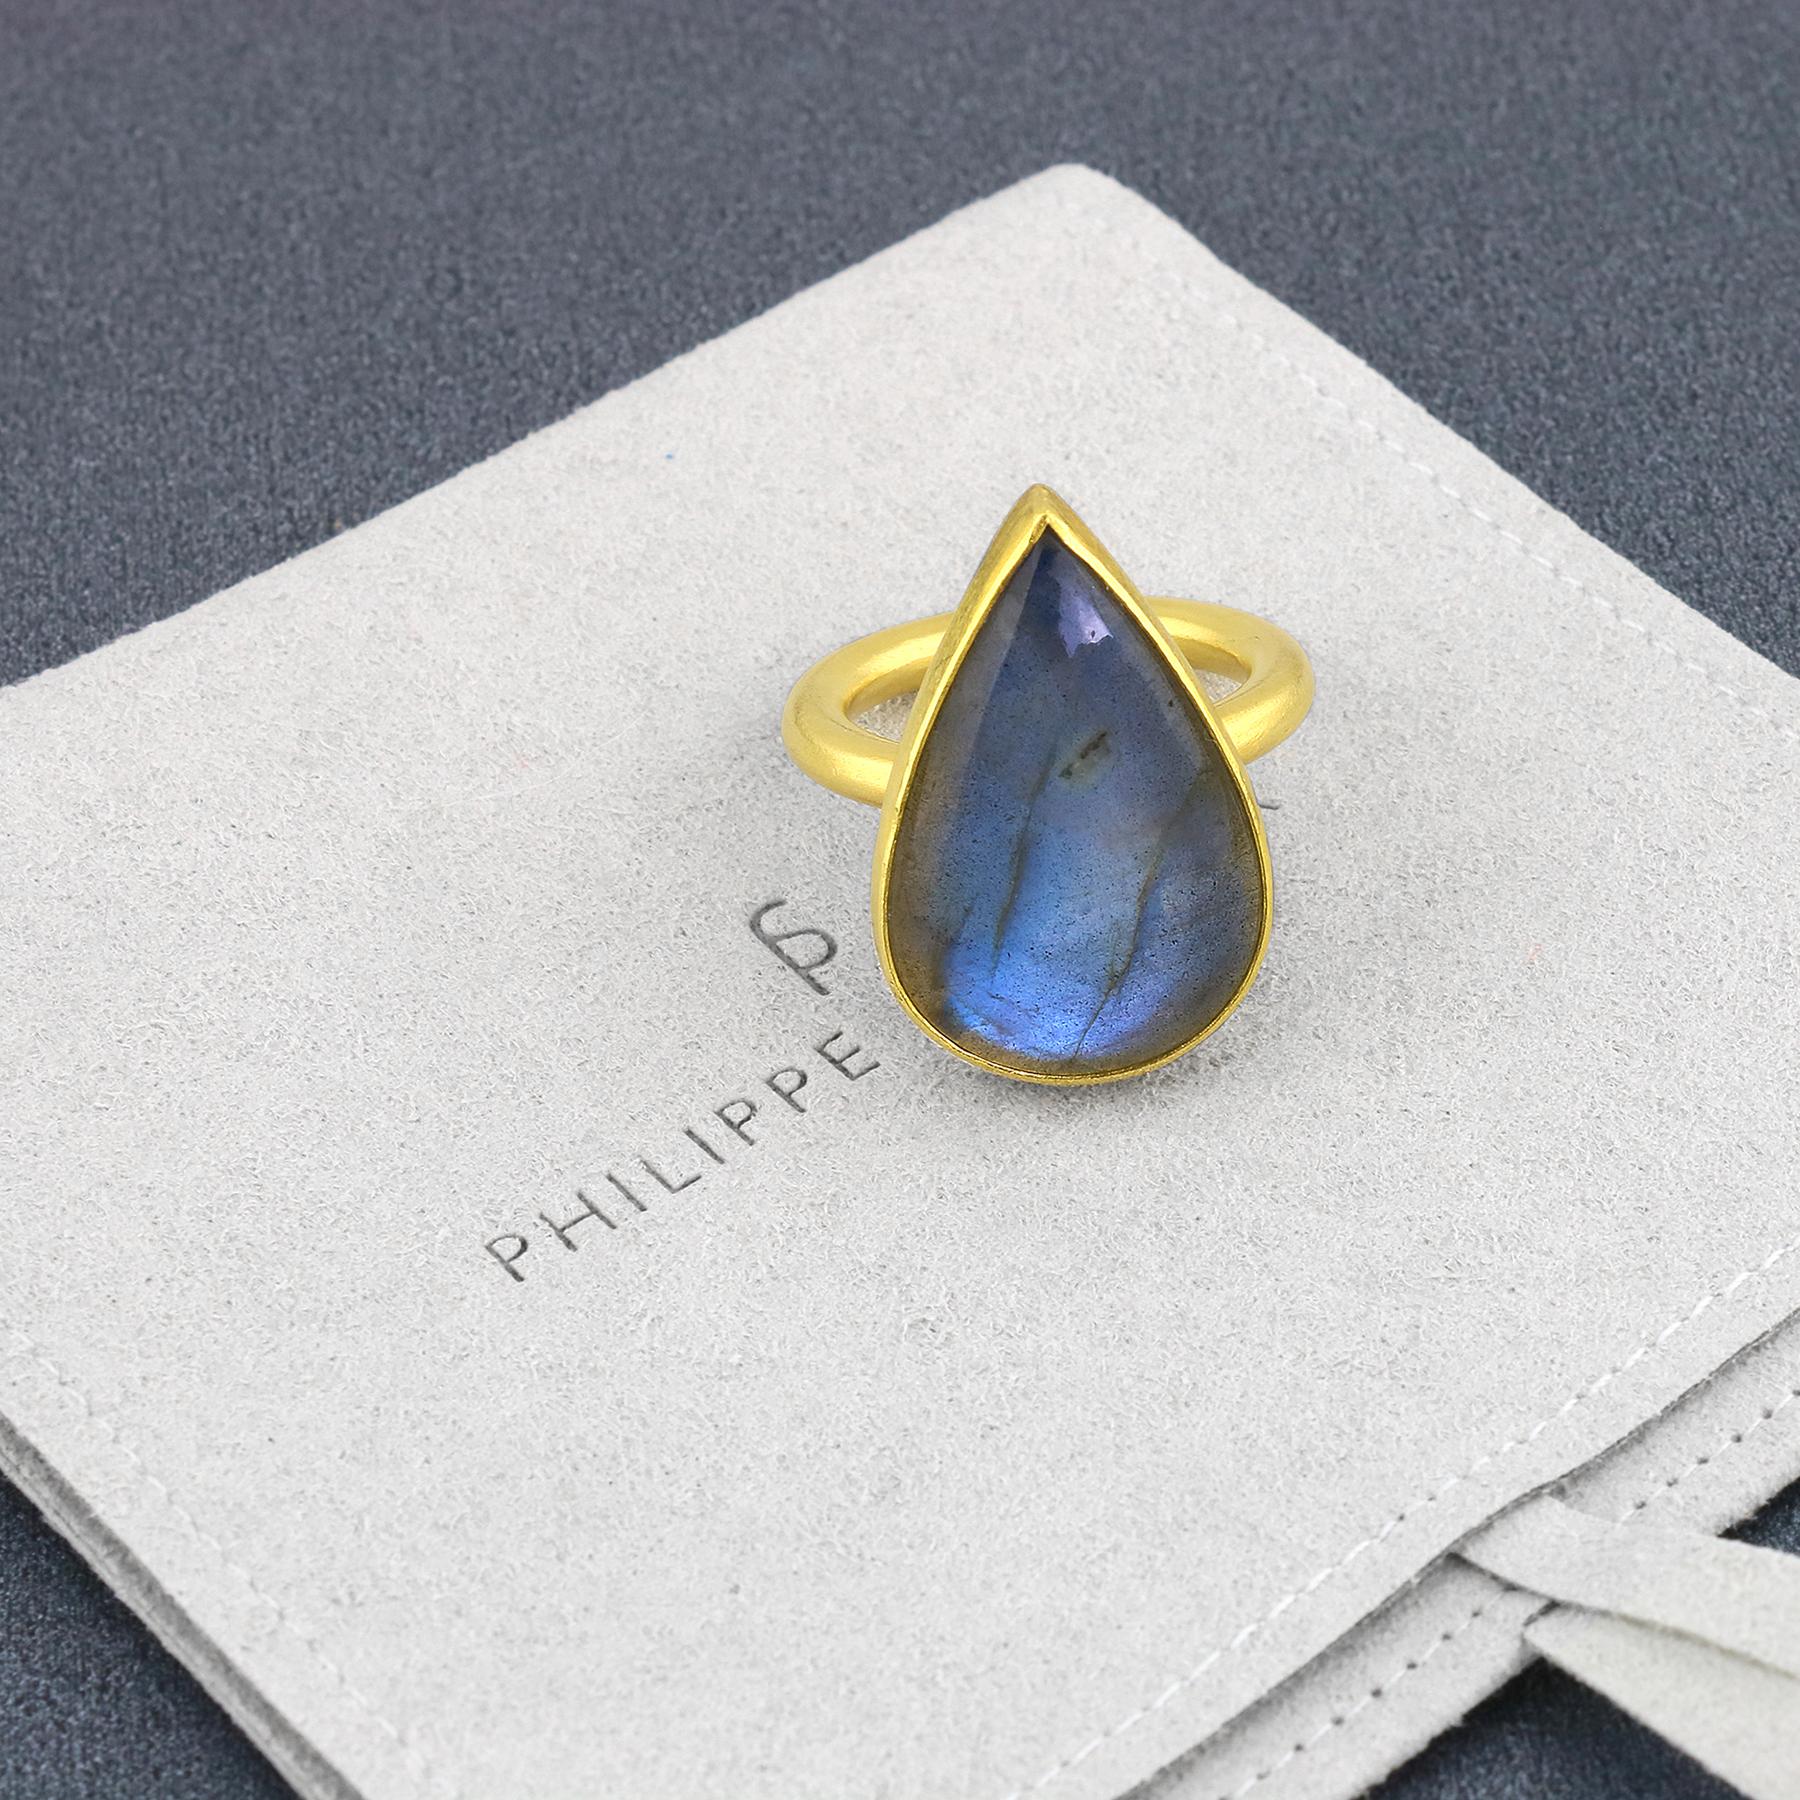 PHILIPPE SPENCER - 20.87 Ct. Labradorite Cabochon wrapped in pure 22K Gold, with Extra Heavy Solid 20K Gold Round Hand & Anvil-Forged Statement Ring.  Heavy Brushed Exterior. Size 8 1/2, and is in-stock and ready to ship. Our apologies in advance,